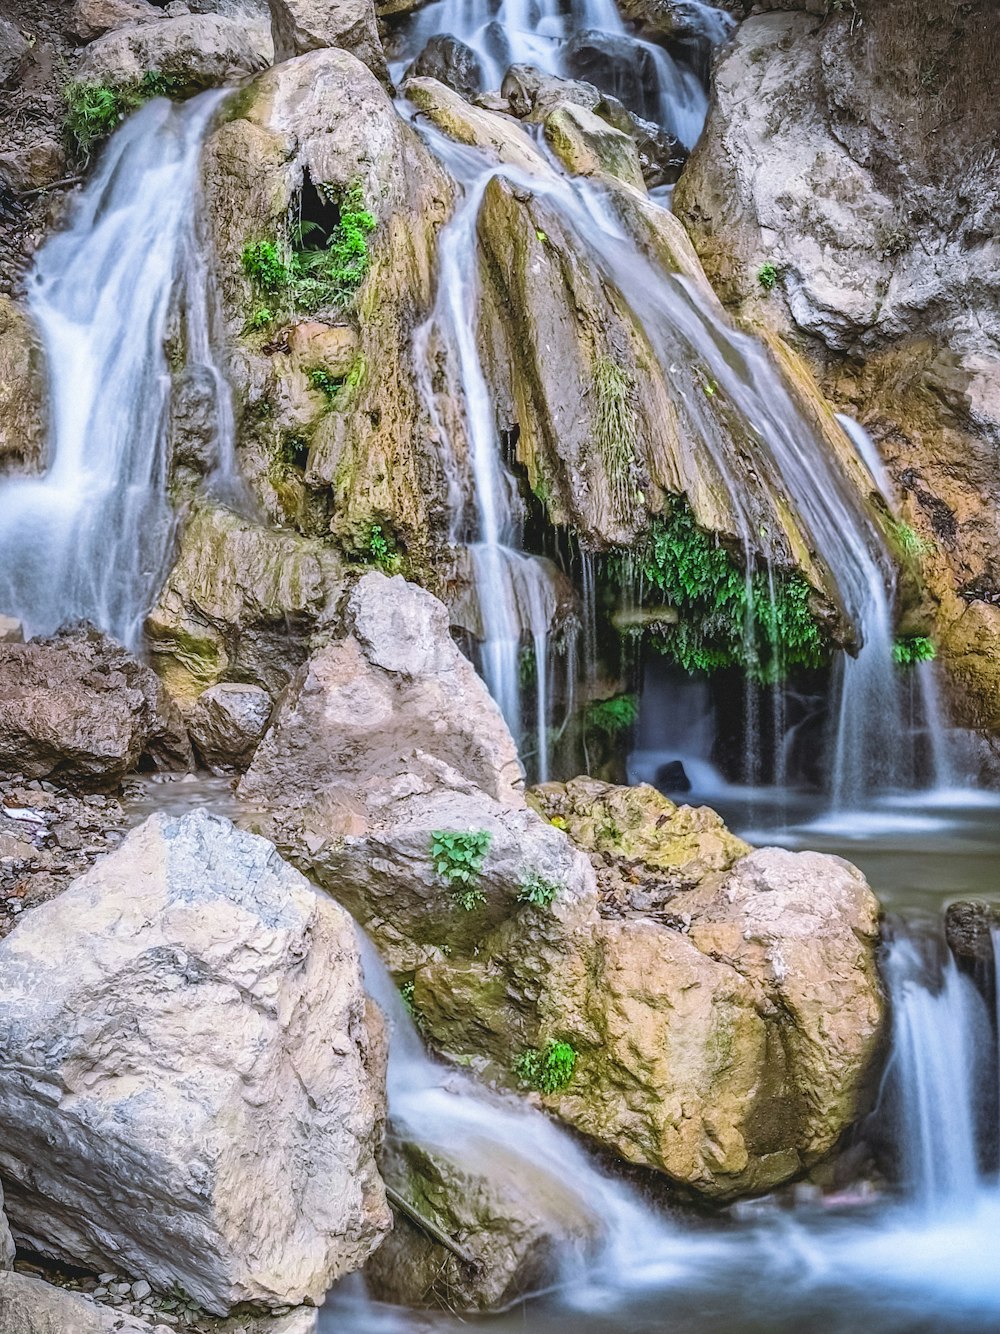 a small waterfall flowing over rocks into a pool of water